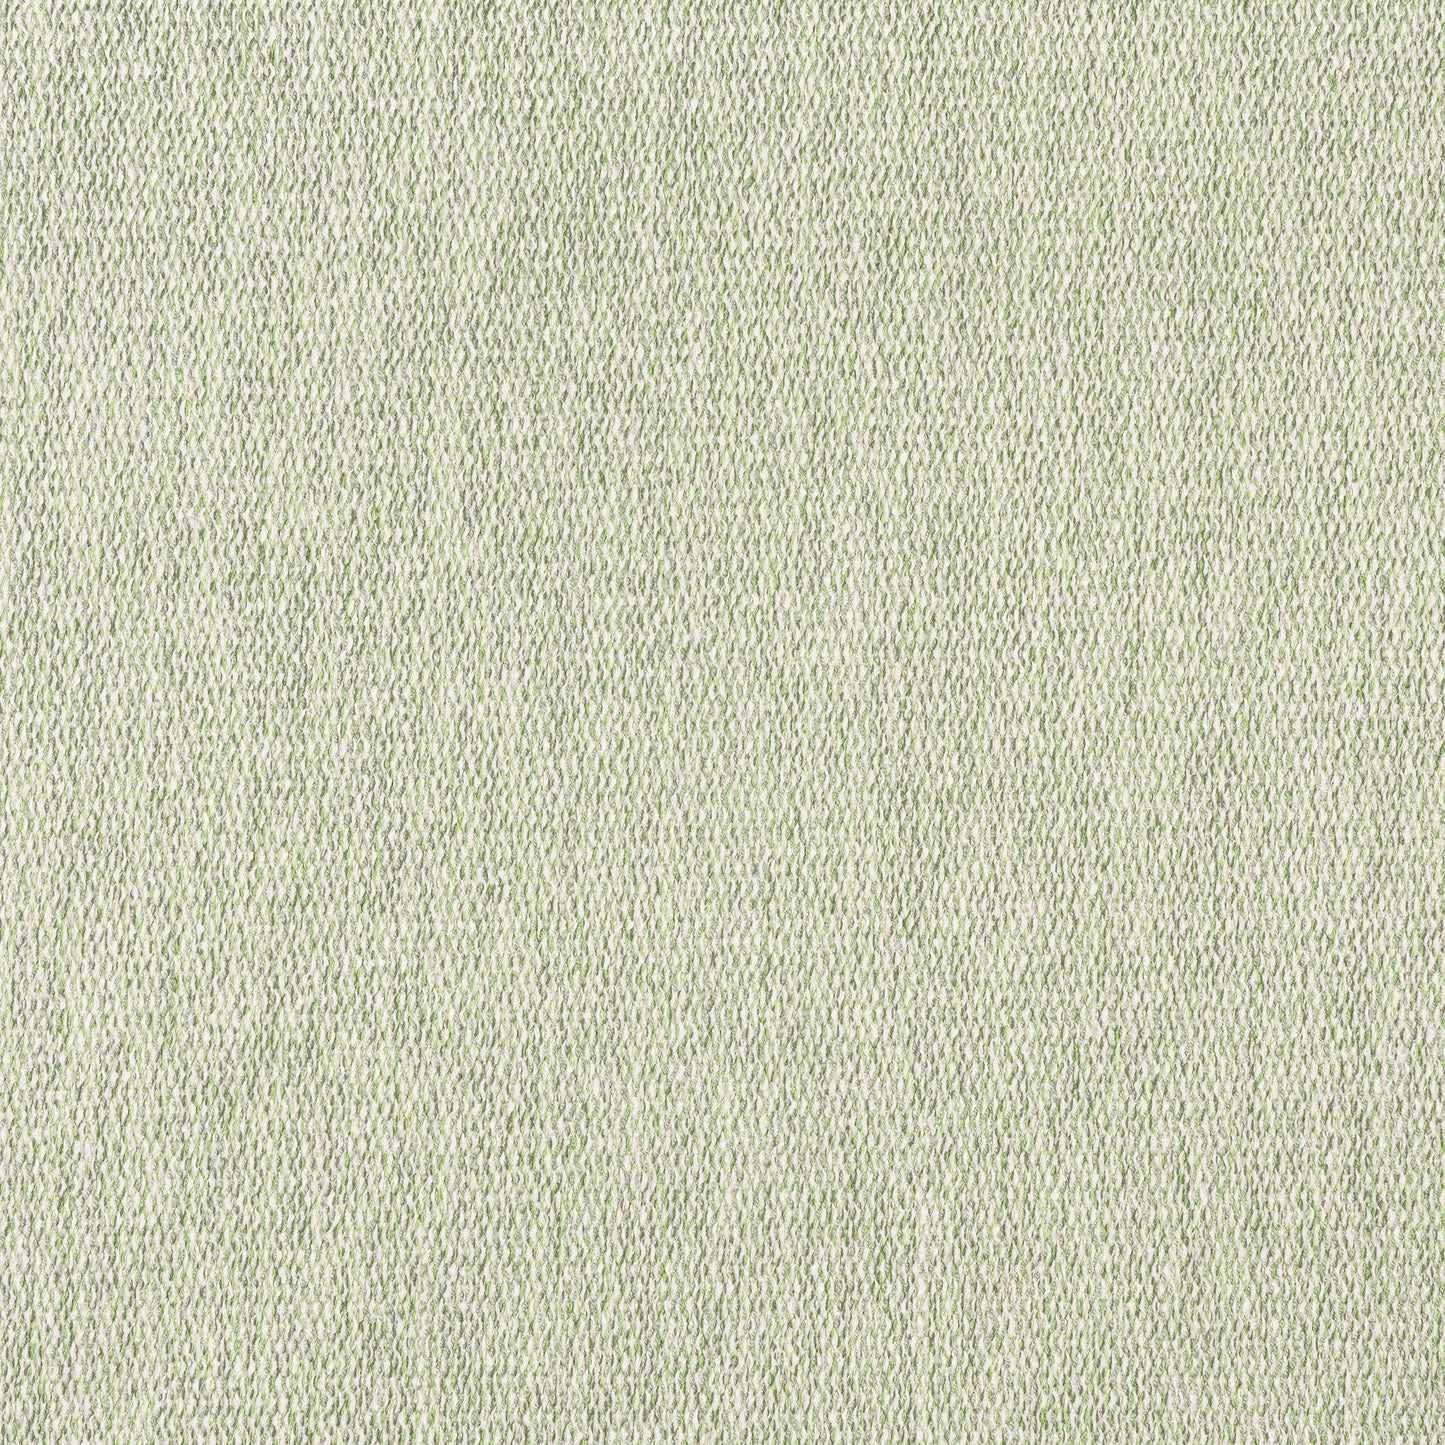 Purchase Thibaut Fabric Pattern W8784 pattern name Arroyo color Green